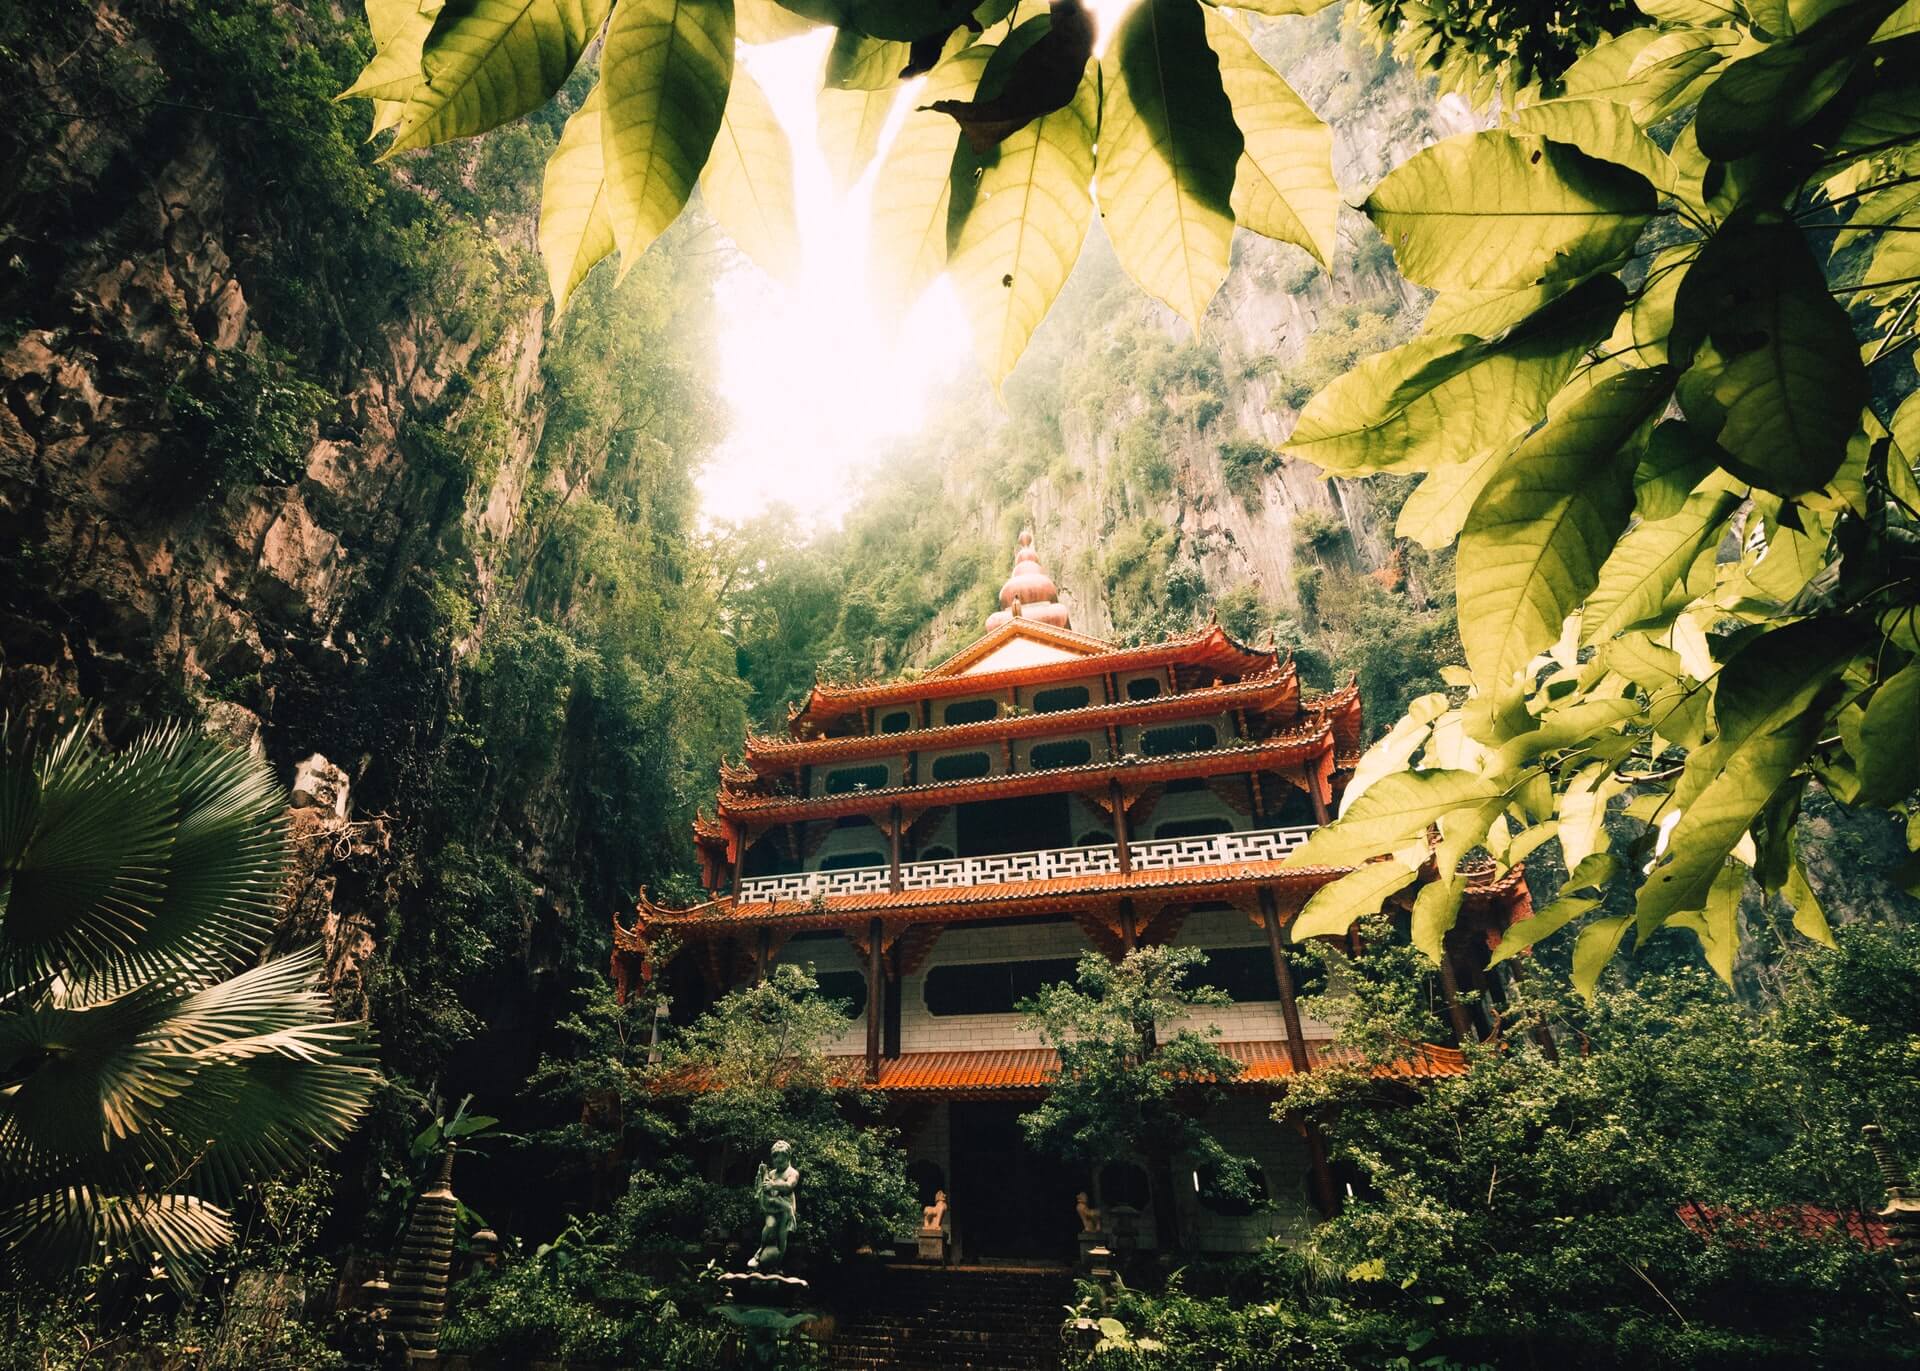 A temple attraction in the rainforest in Malaysia, Ipoh